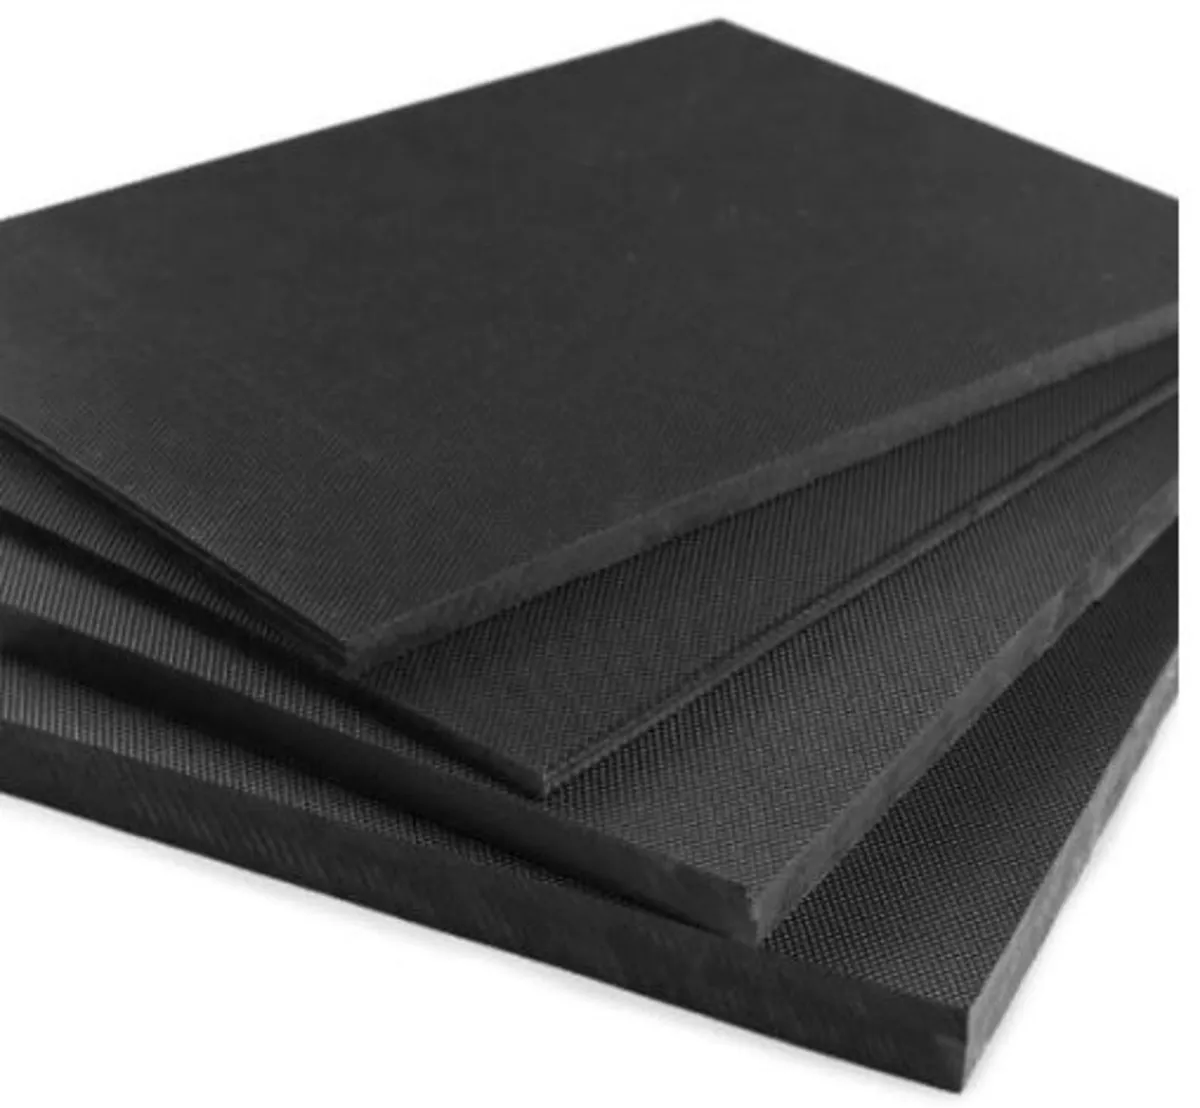 Stokbord 100% Recycled Plastic 8x4ft Sheets 18mm